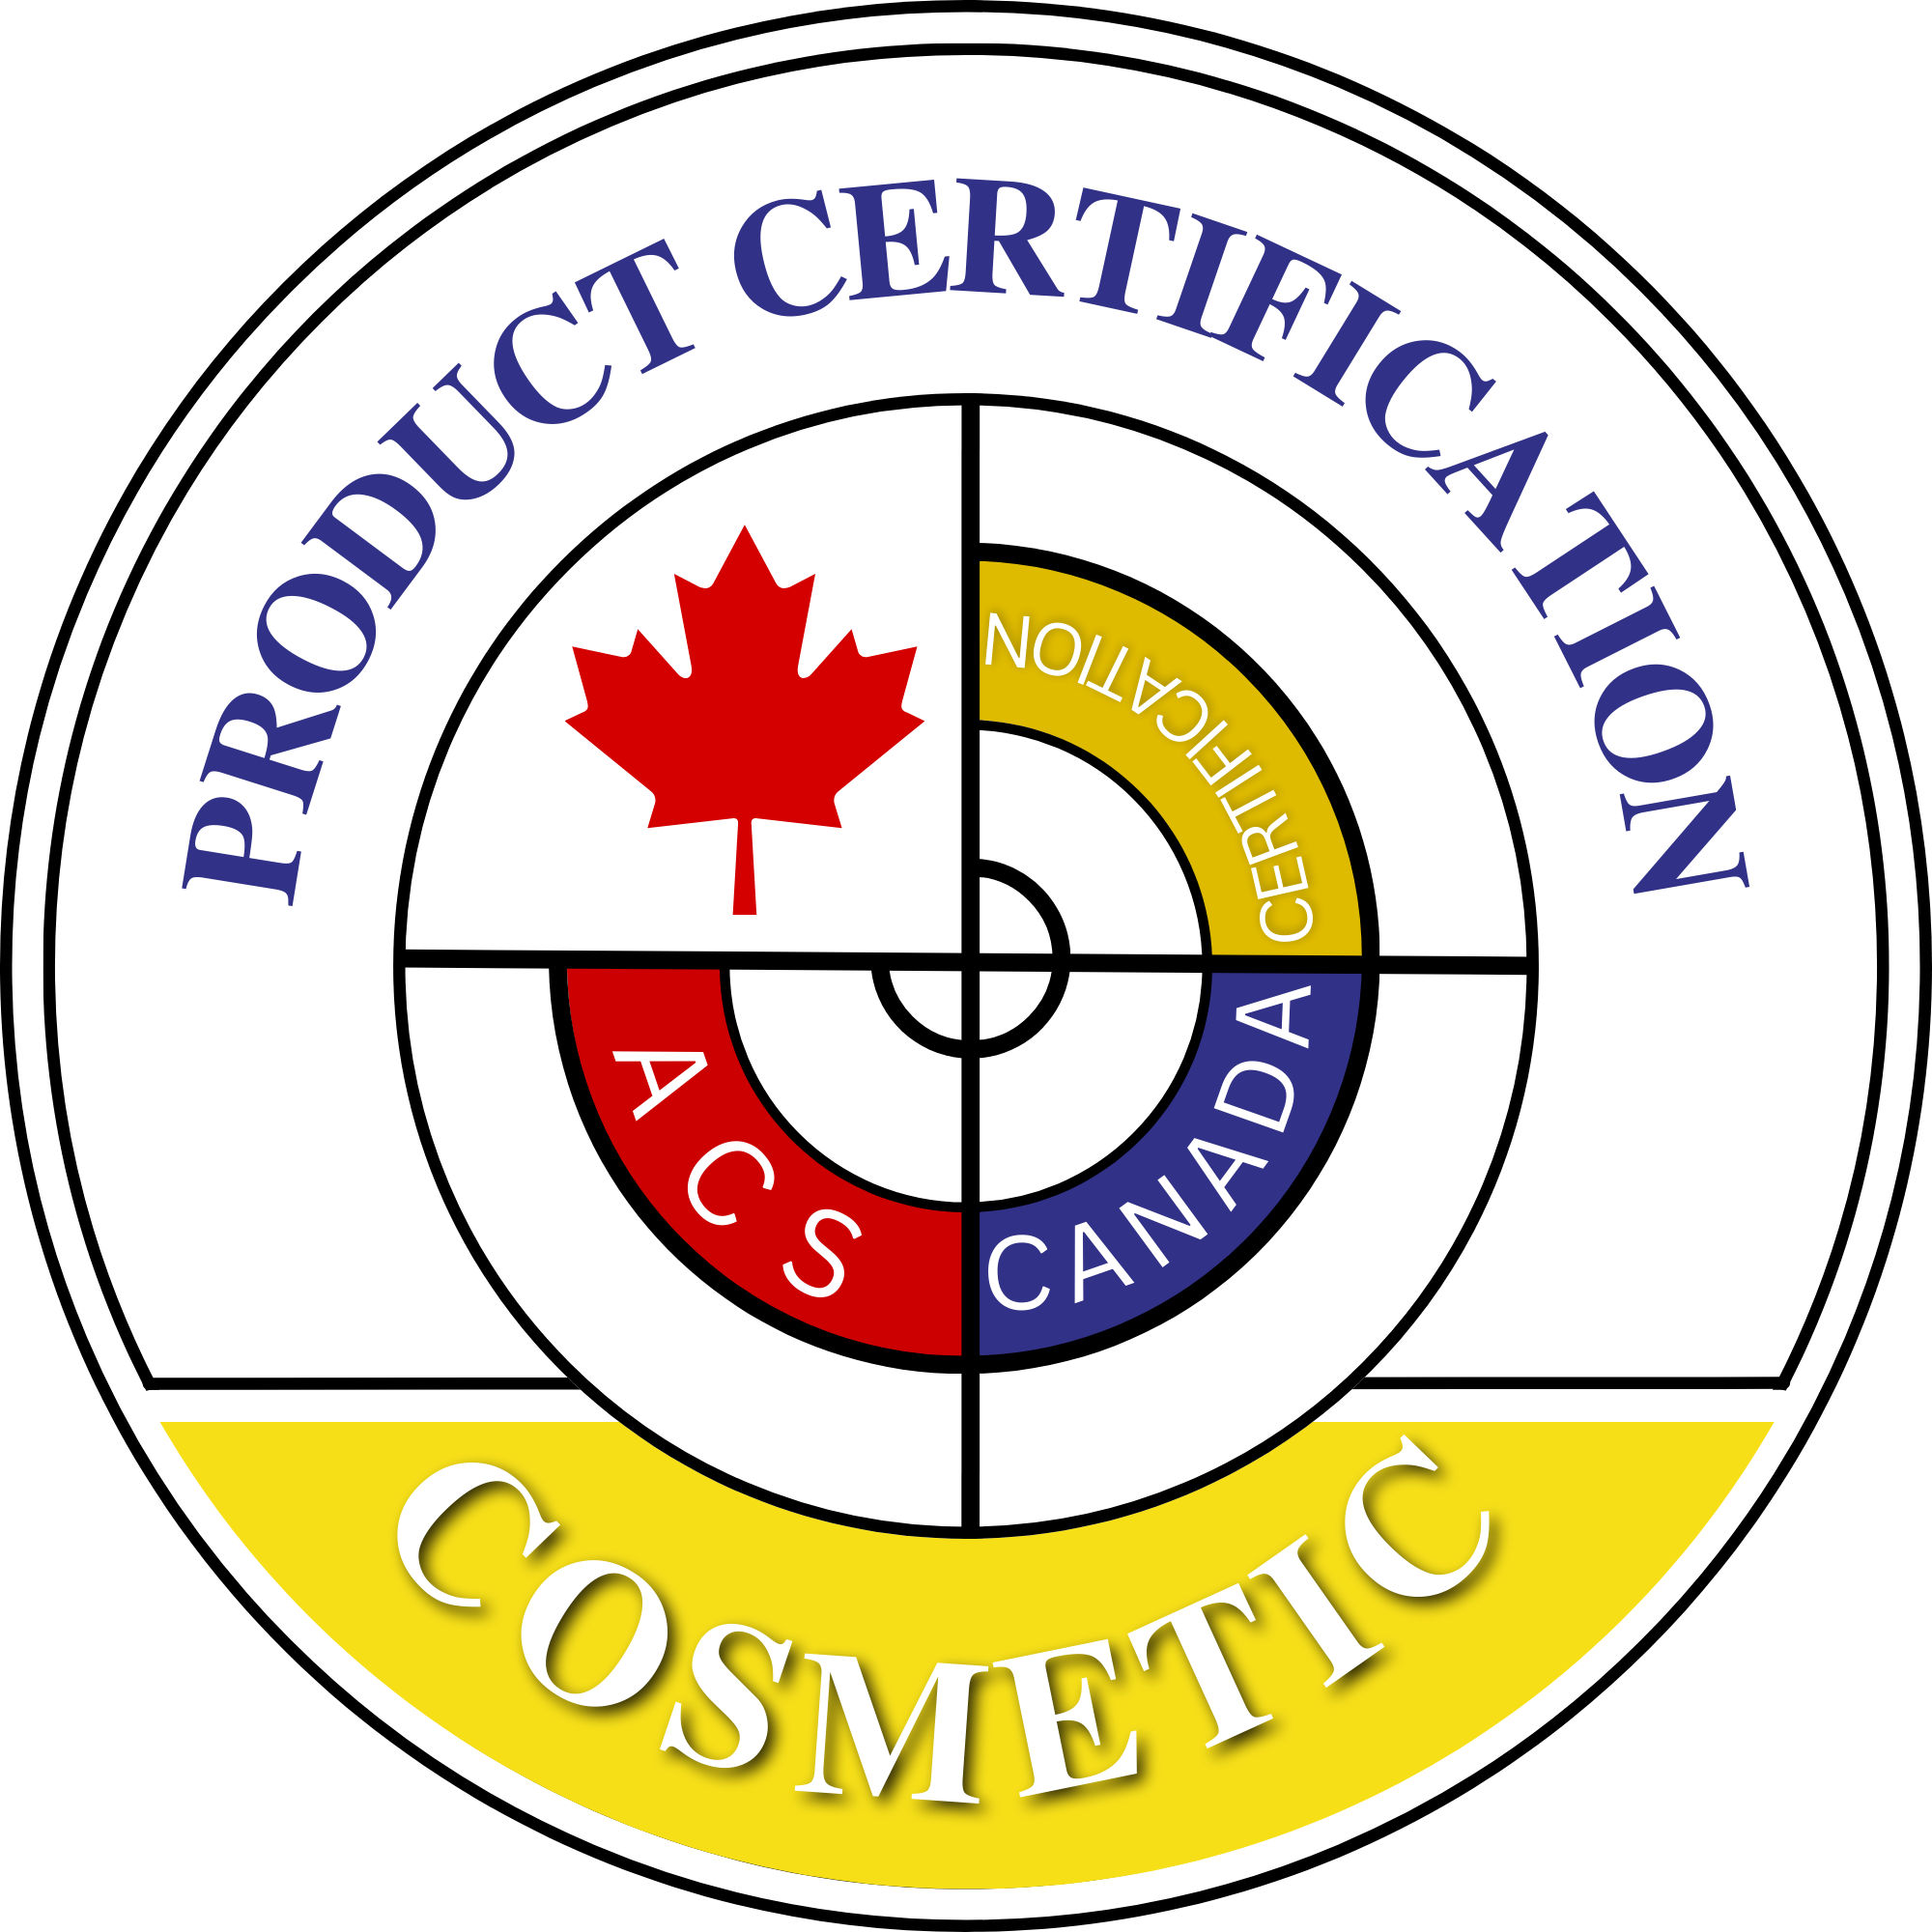 COSMETIC AND HYGIENIC  - canadacerts.ca